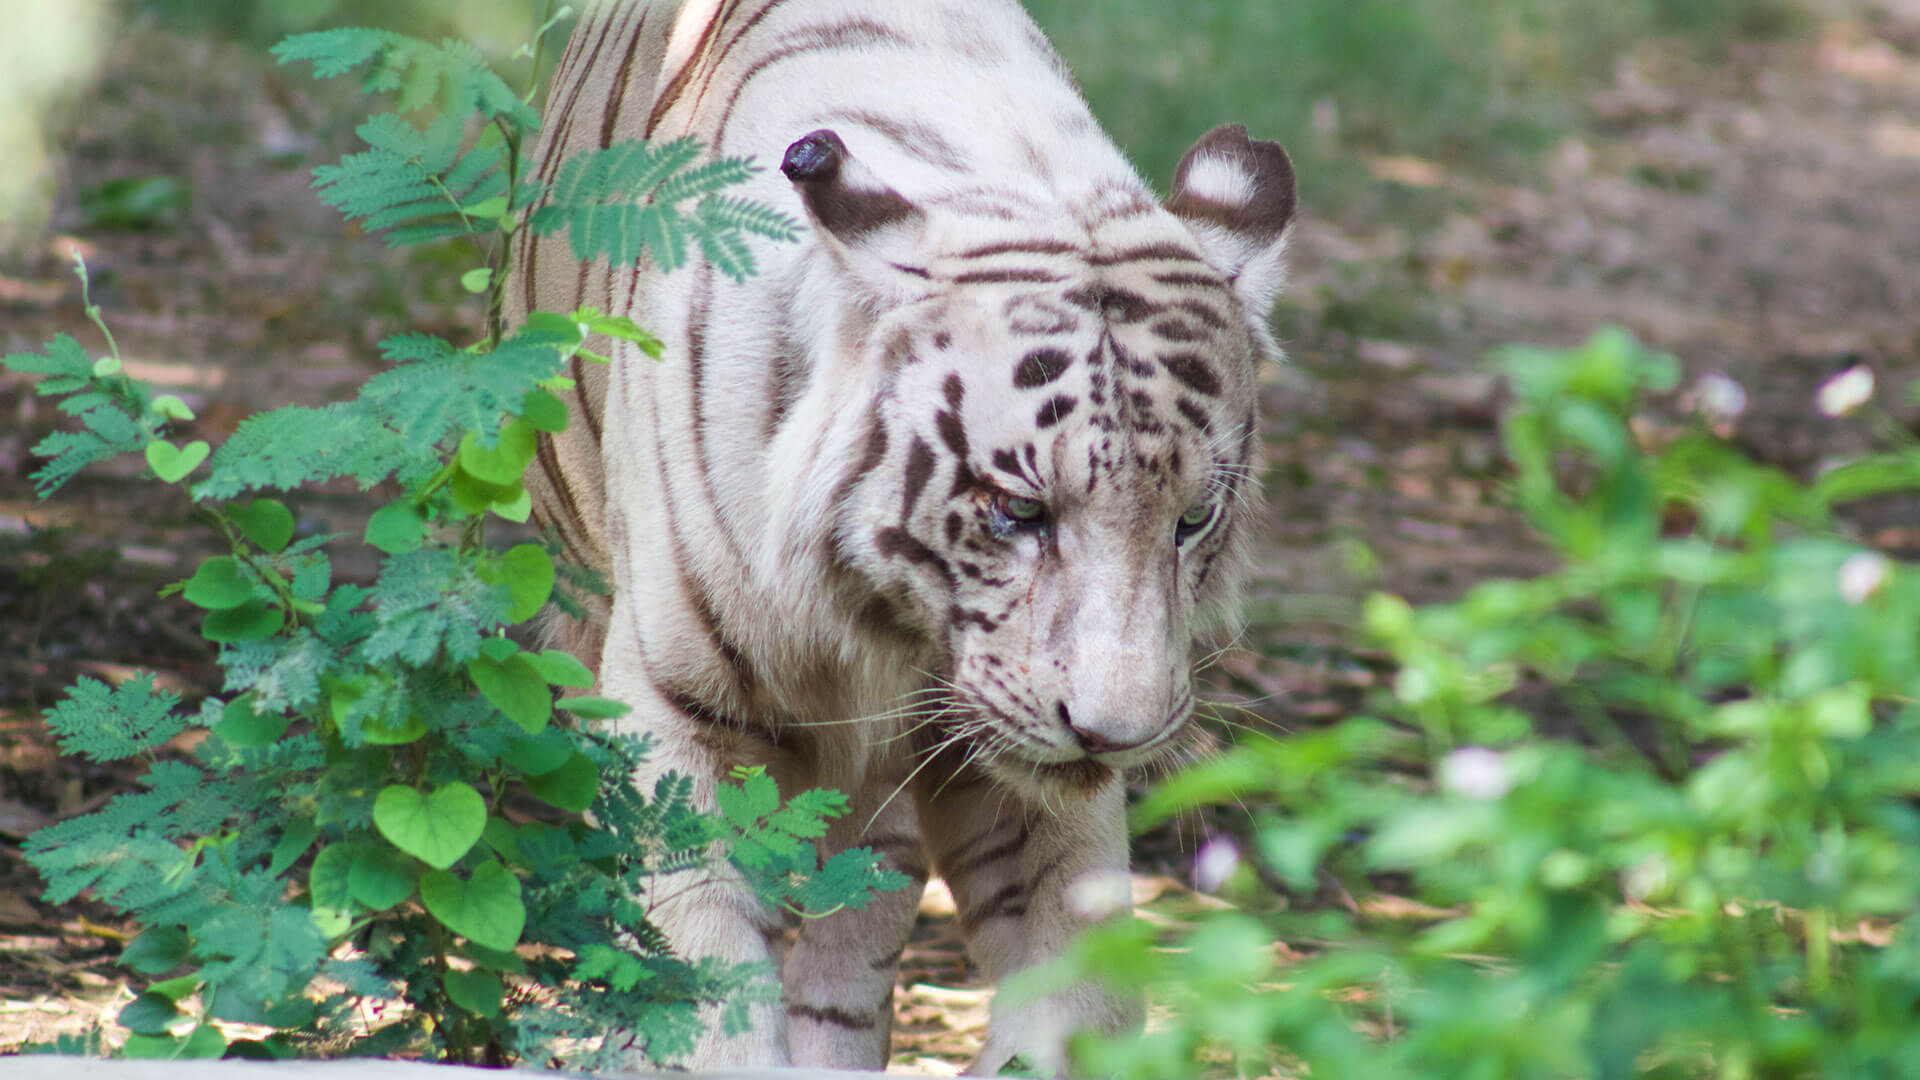 Lucknow Zoo - Tickets, Location, Timings, Photos | Adotrip